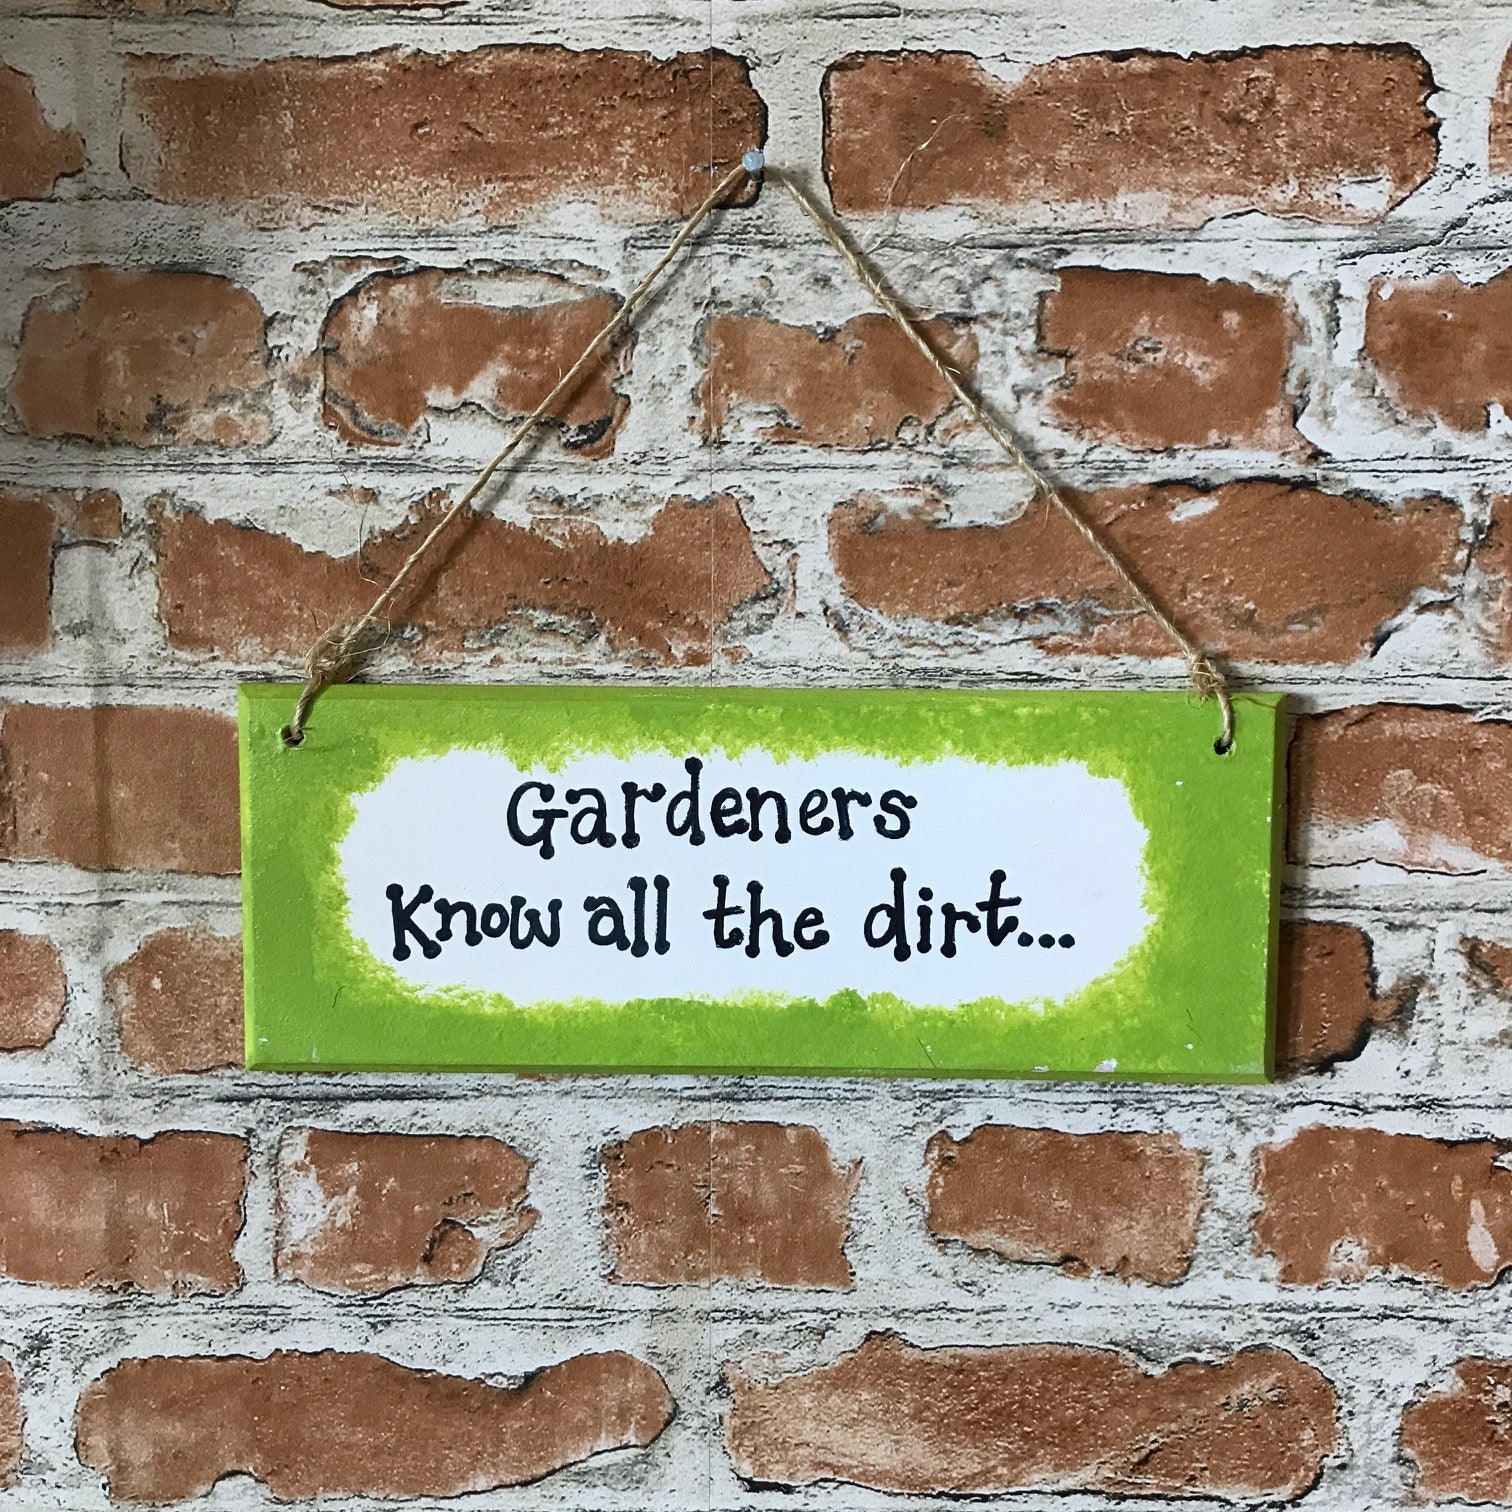 Gardeners know all the dirt - Handmade Wooden Plaque